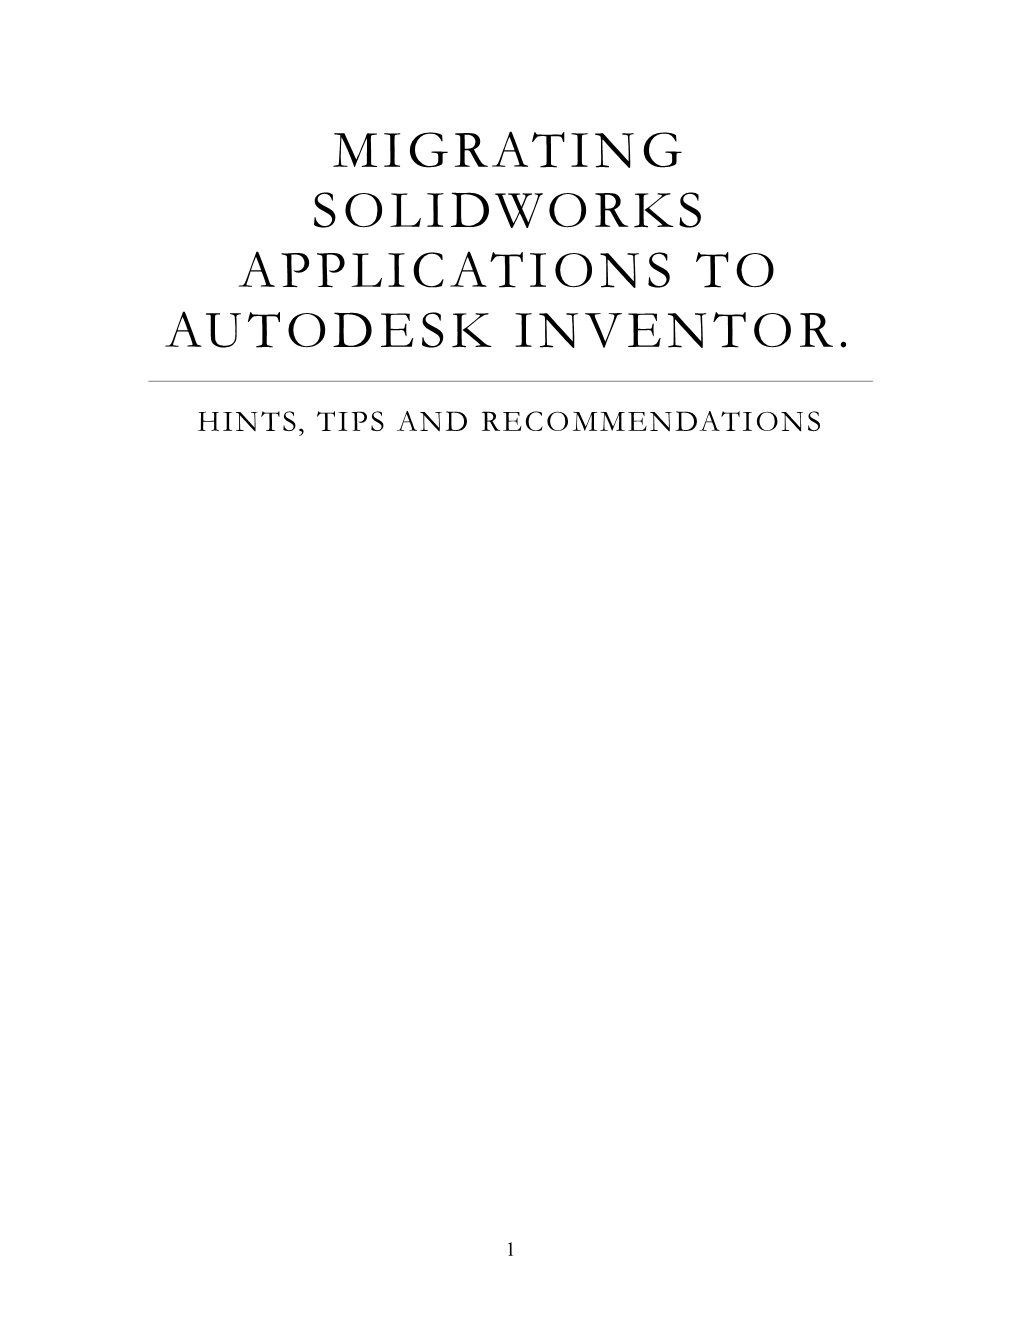 Migrating Solidworks Applications to Autodesk Inventor